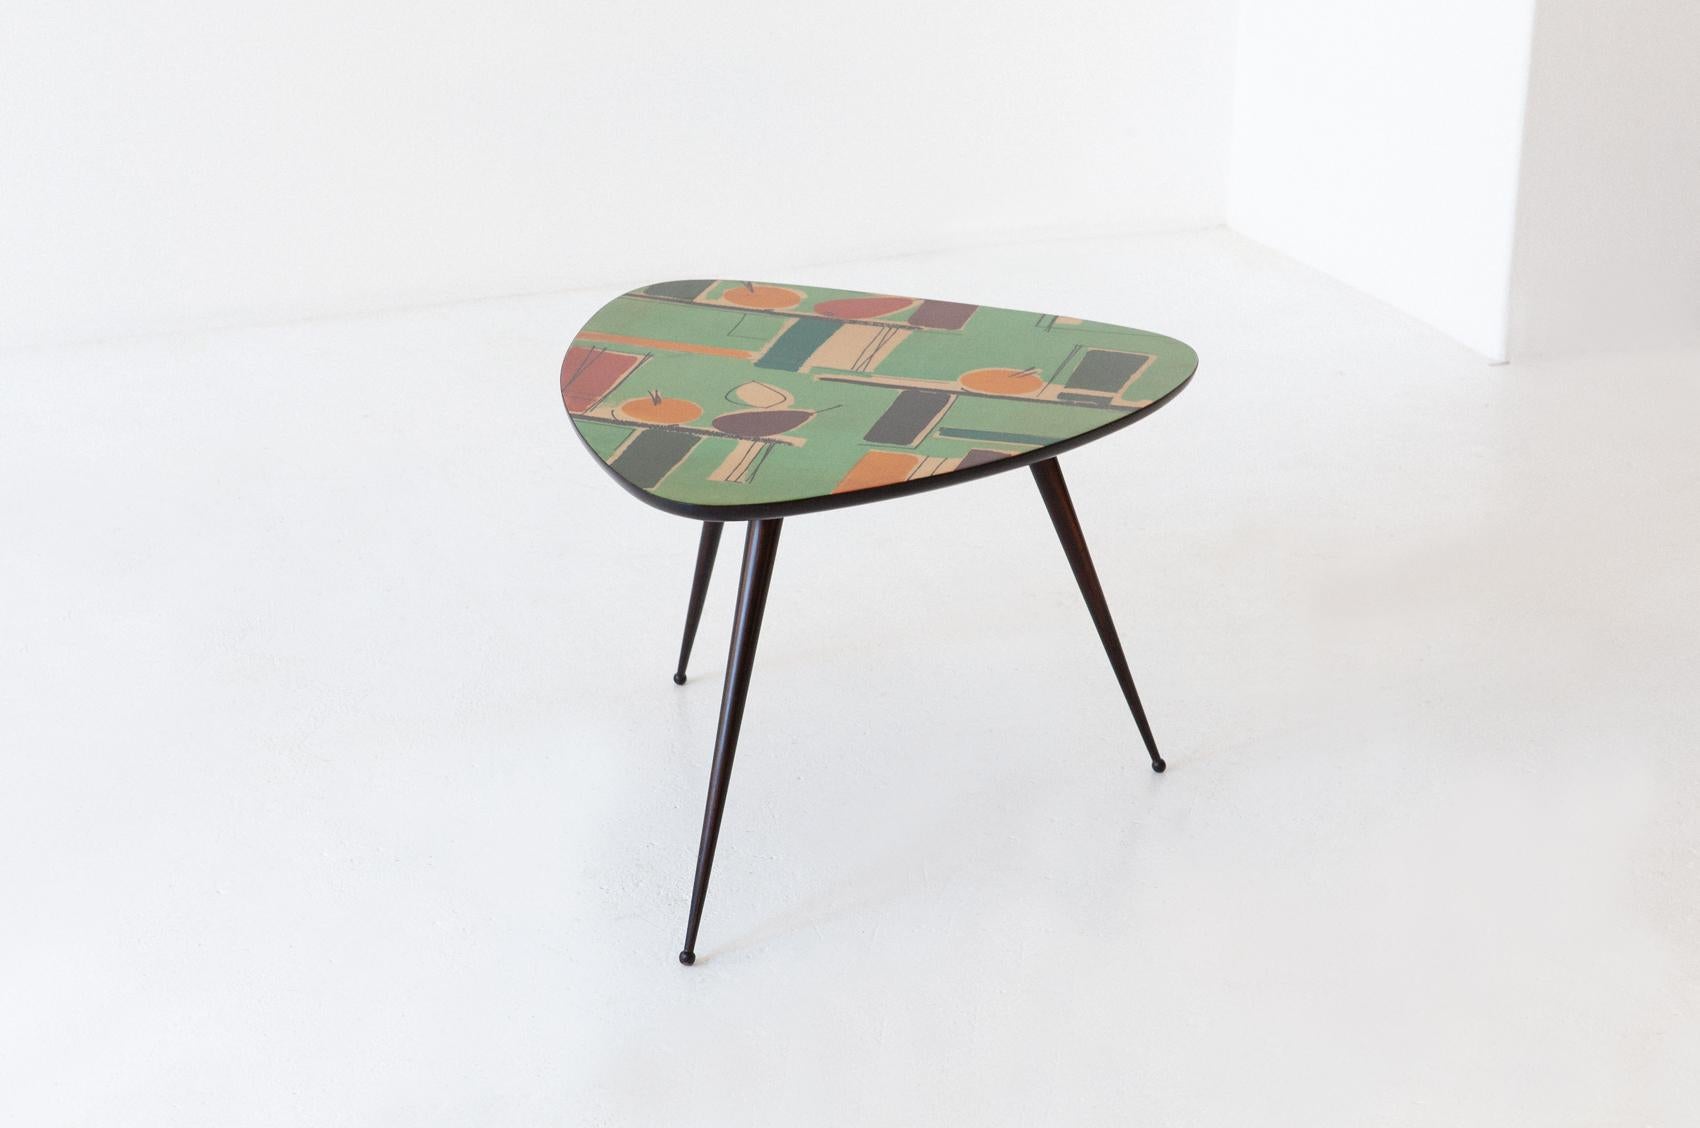 A trioval low table manufactured in Italy during the 1950s. COD. T80
The triangular top has been painted by hand, drawings represent pears and apples. Bright colors on green and brown shades.
The brown legs have been restored, polished by hand